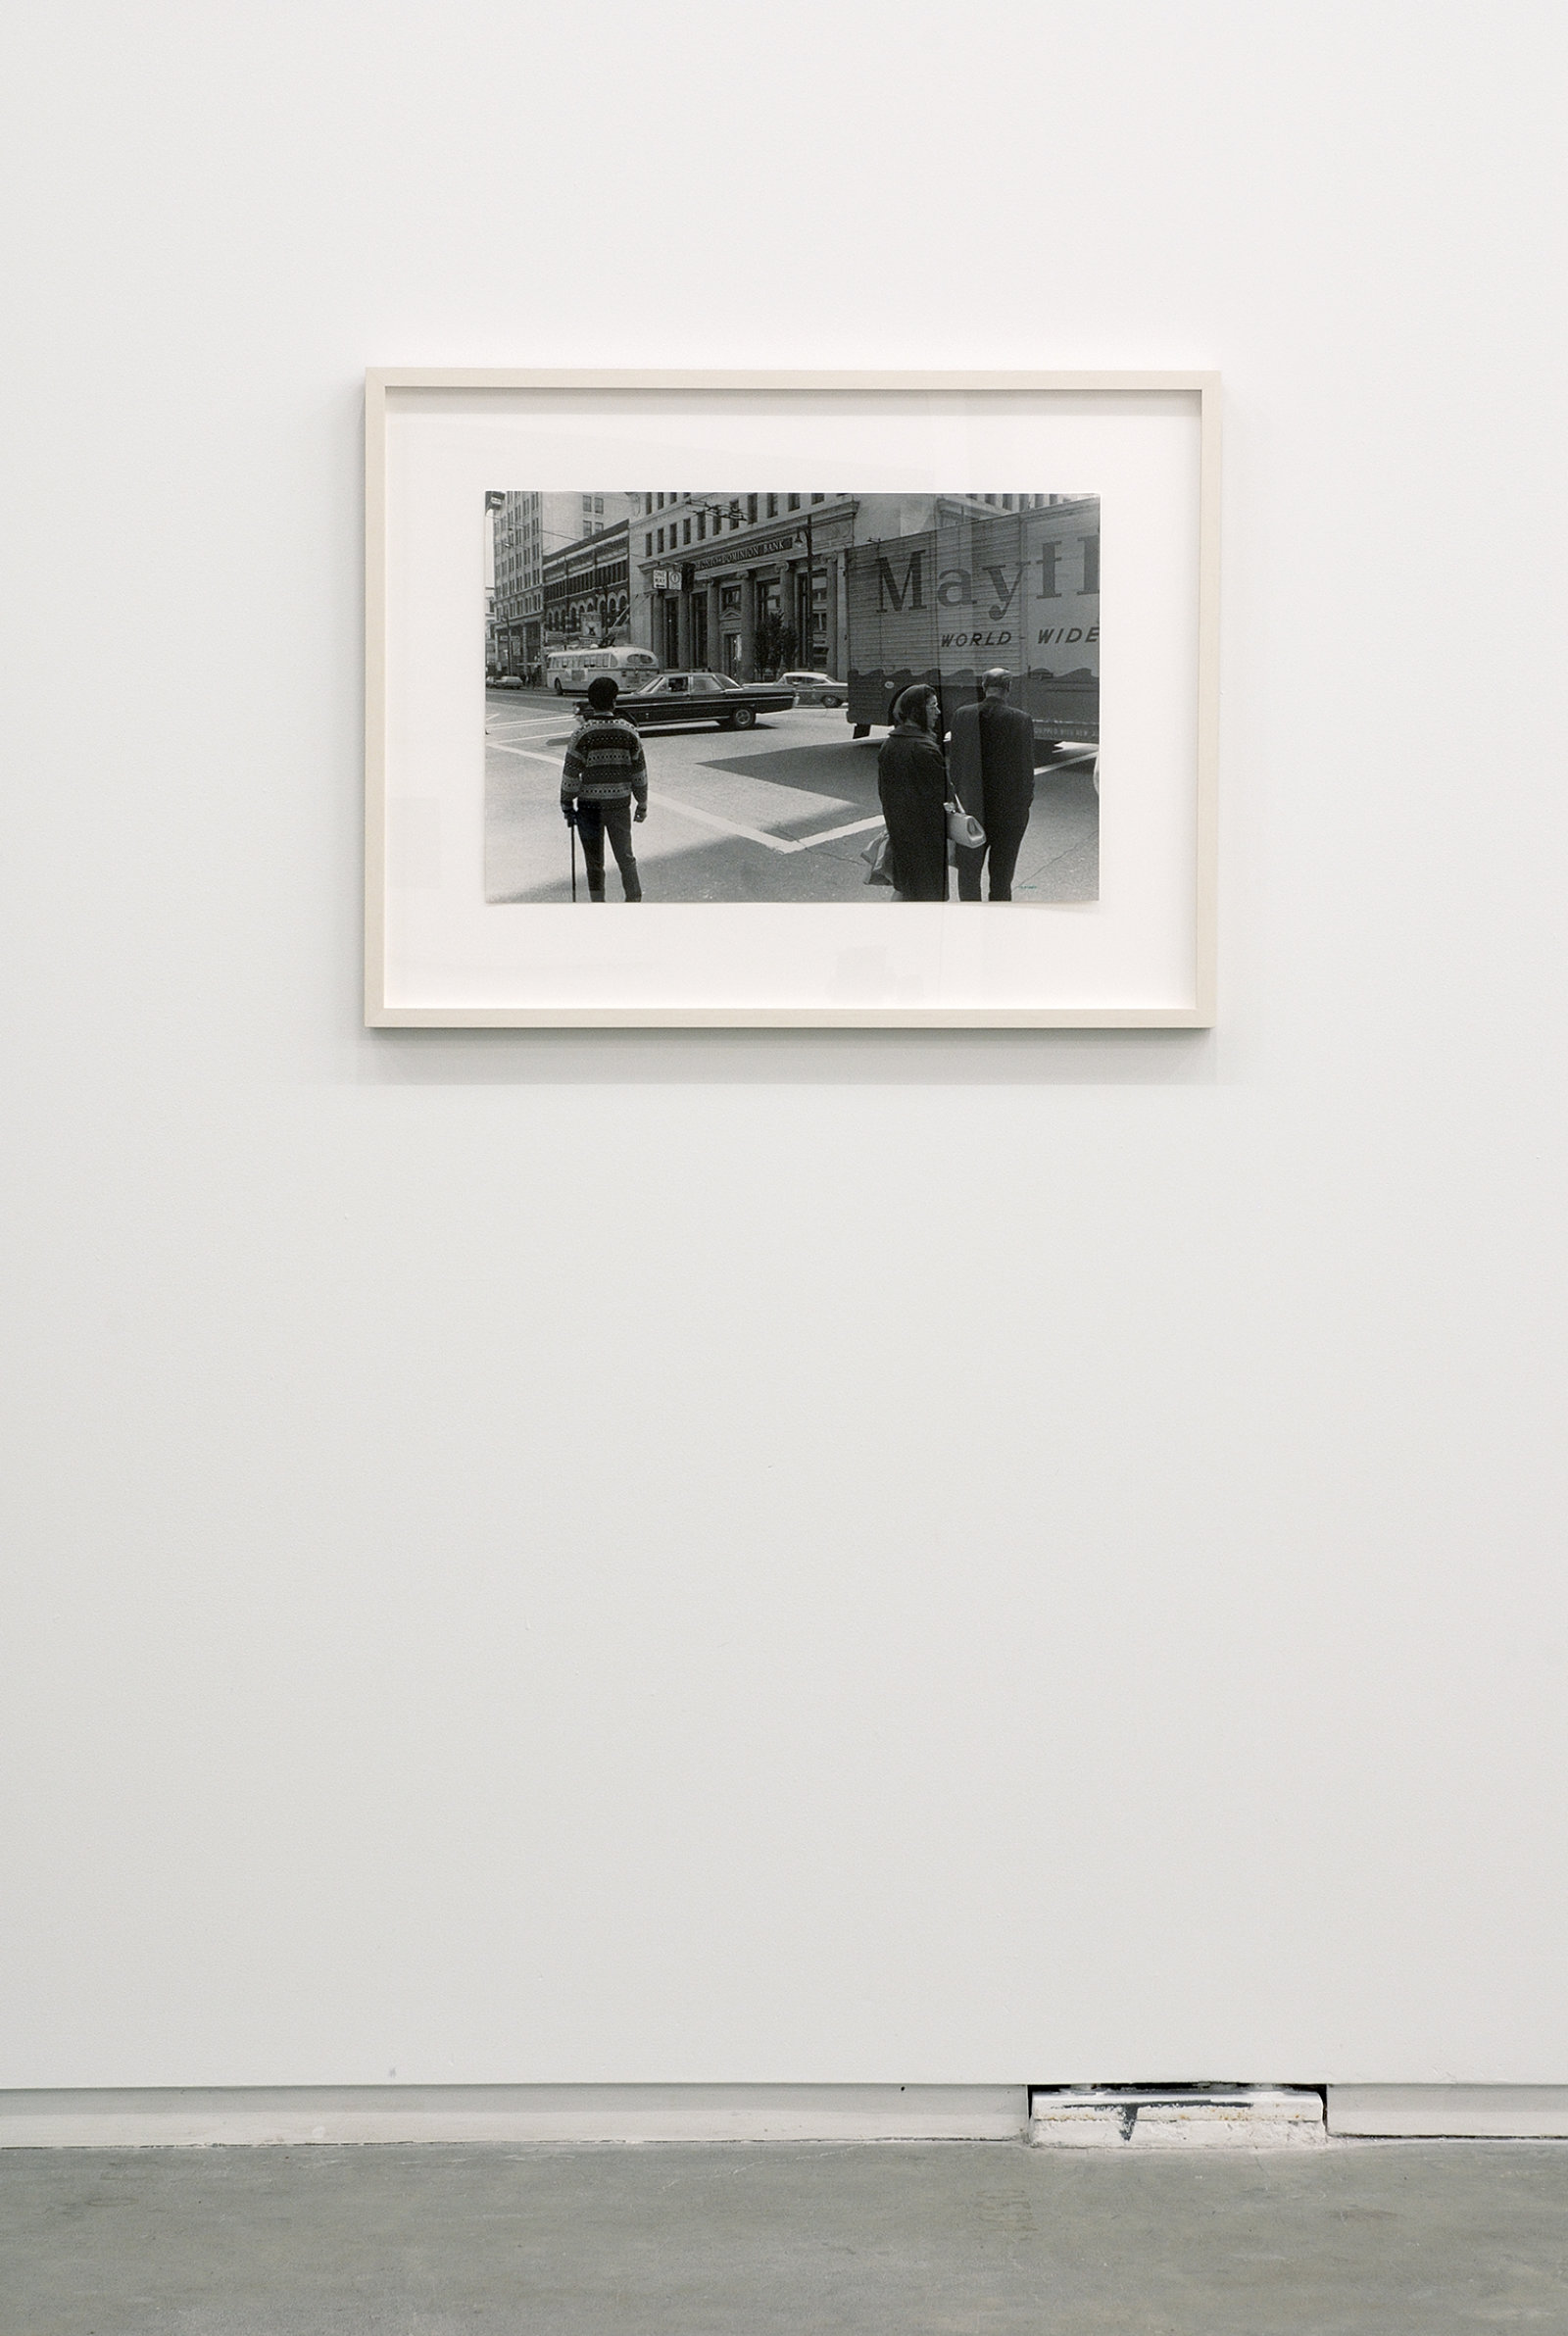 Ian Wallace, Untitled (Intersection), 1970–1995, silver print, 16 x 24 in. (39 x 60 cm)